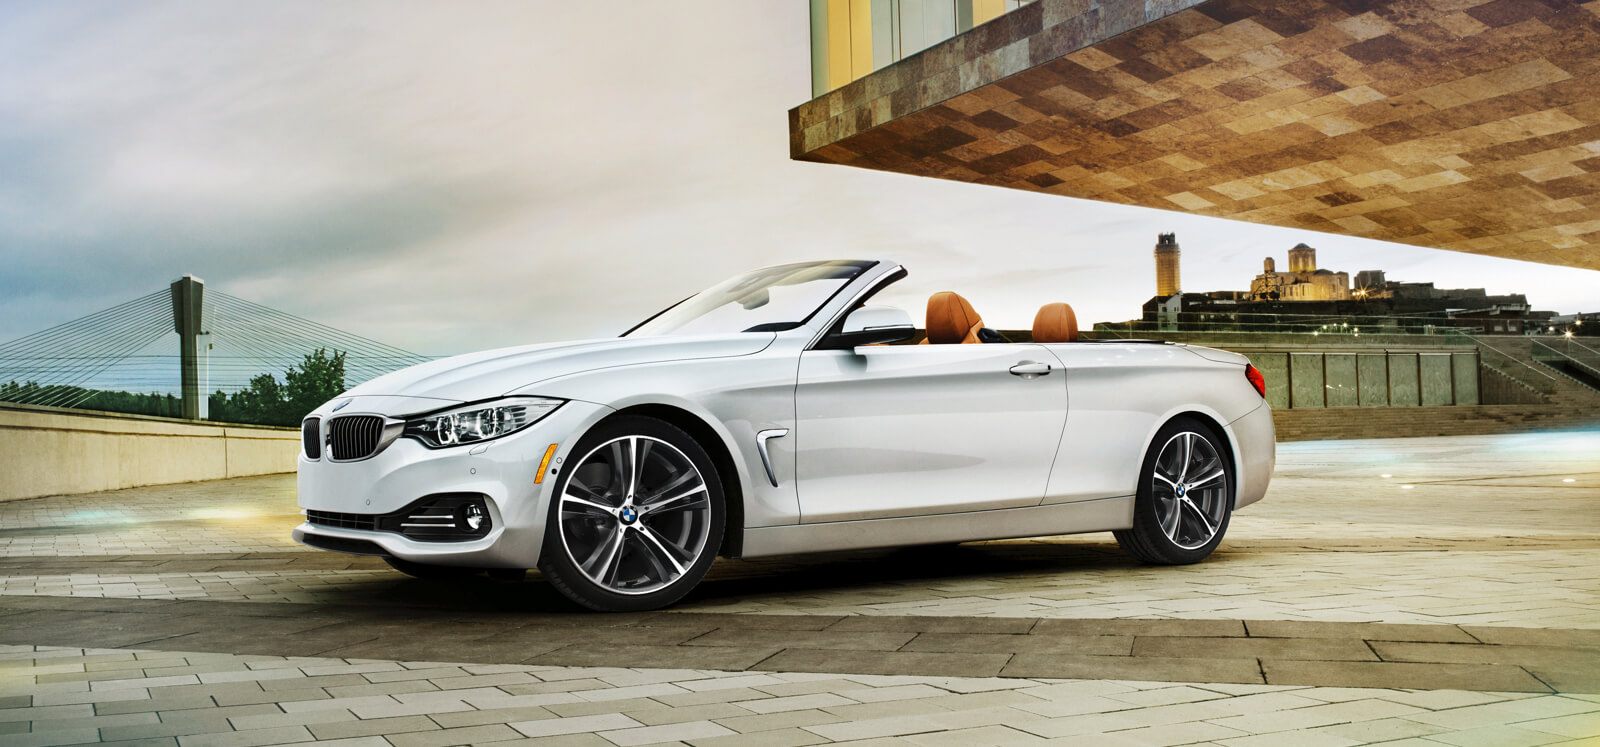 Nice wallpapers BMW 4 Series Cabrio 1600x747px